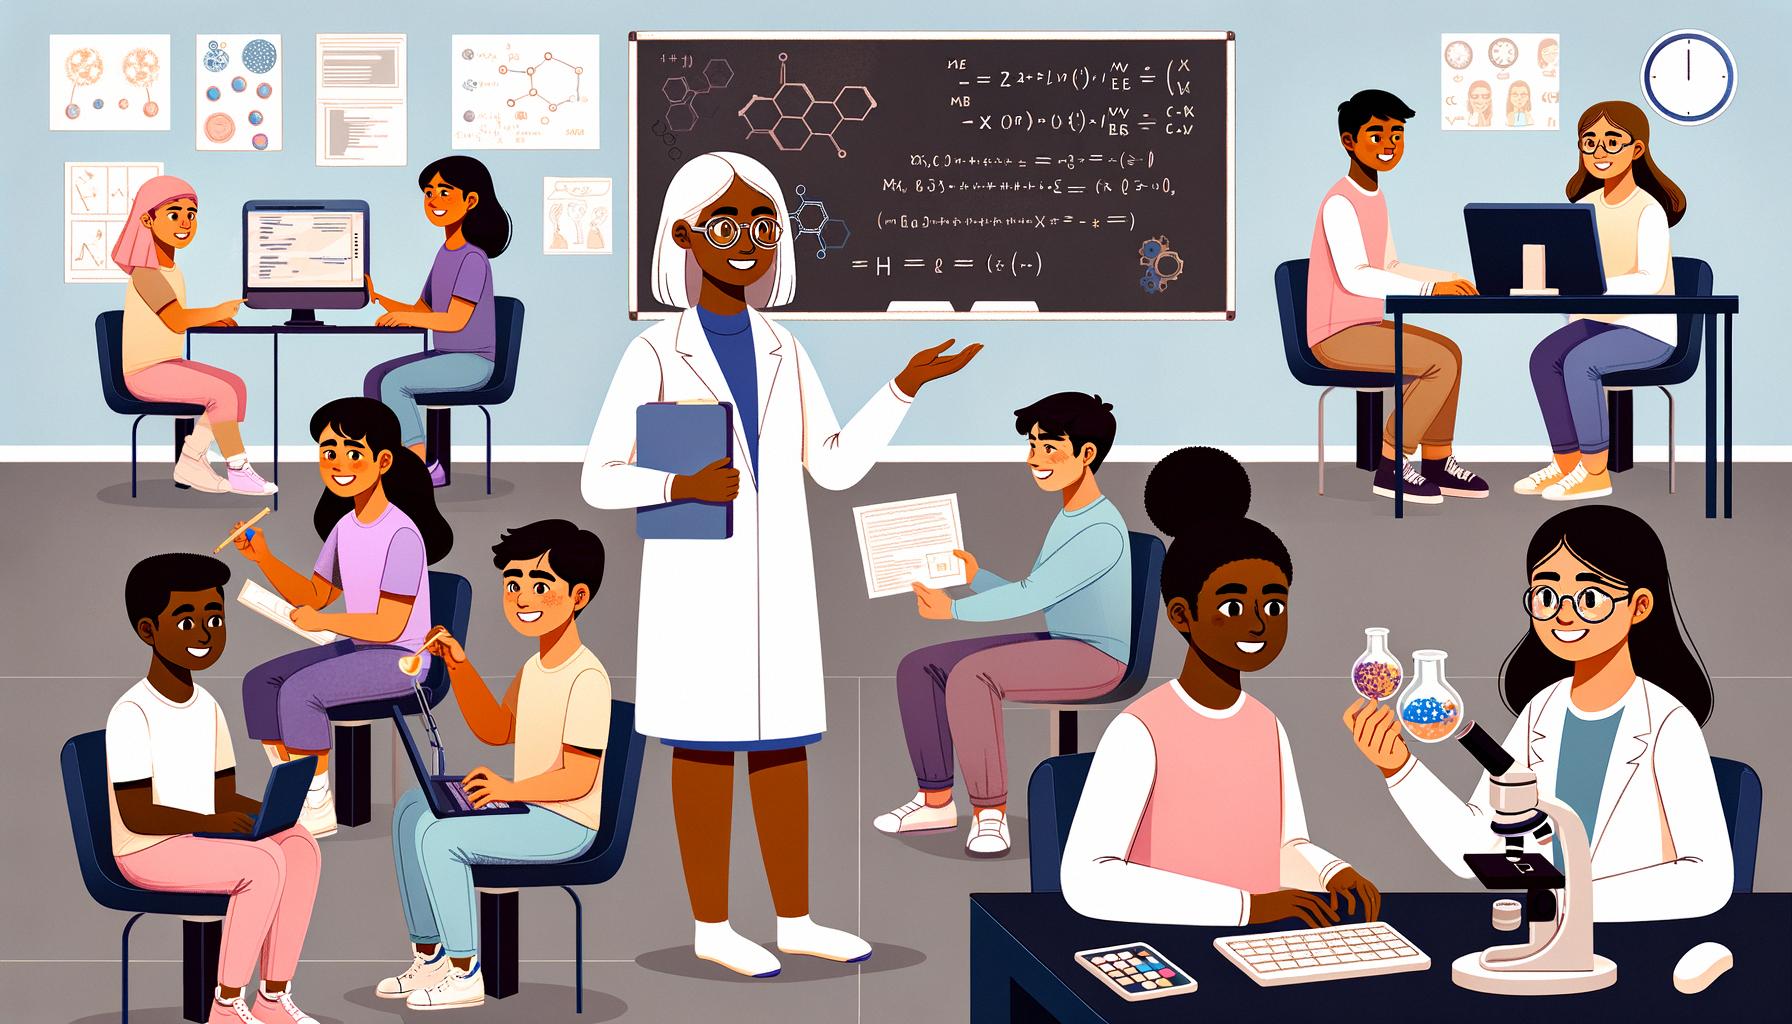 Effective mentorship in STEM fields critical for diverse student success and wellbeing.